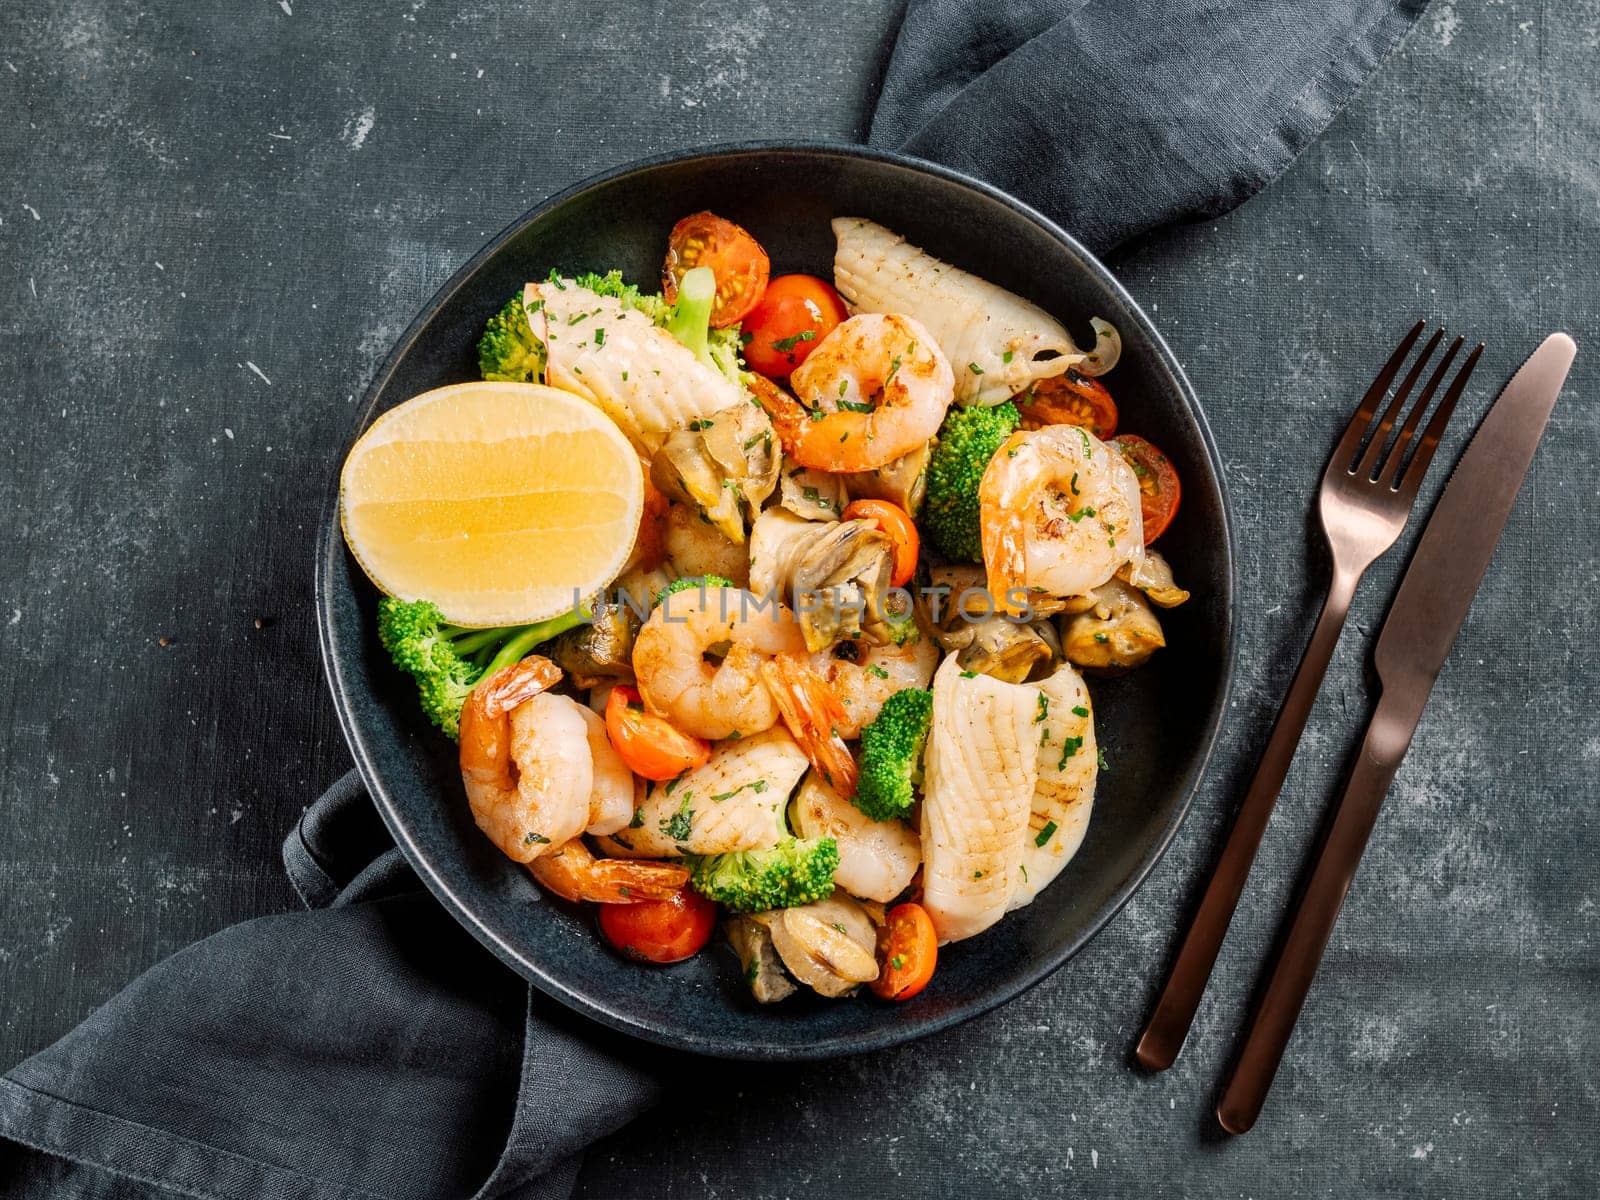 Mixed Seafood Contain Shrimps, Mussels, Calamari Squids and Fish with Broccoli, Cherry Tomato, Lemon on Black dish in restaurant-style platting. Seafood salad on dark background. Top view